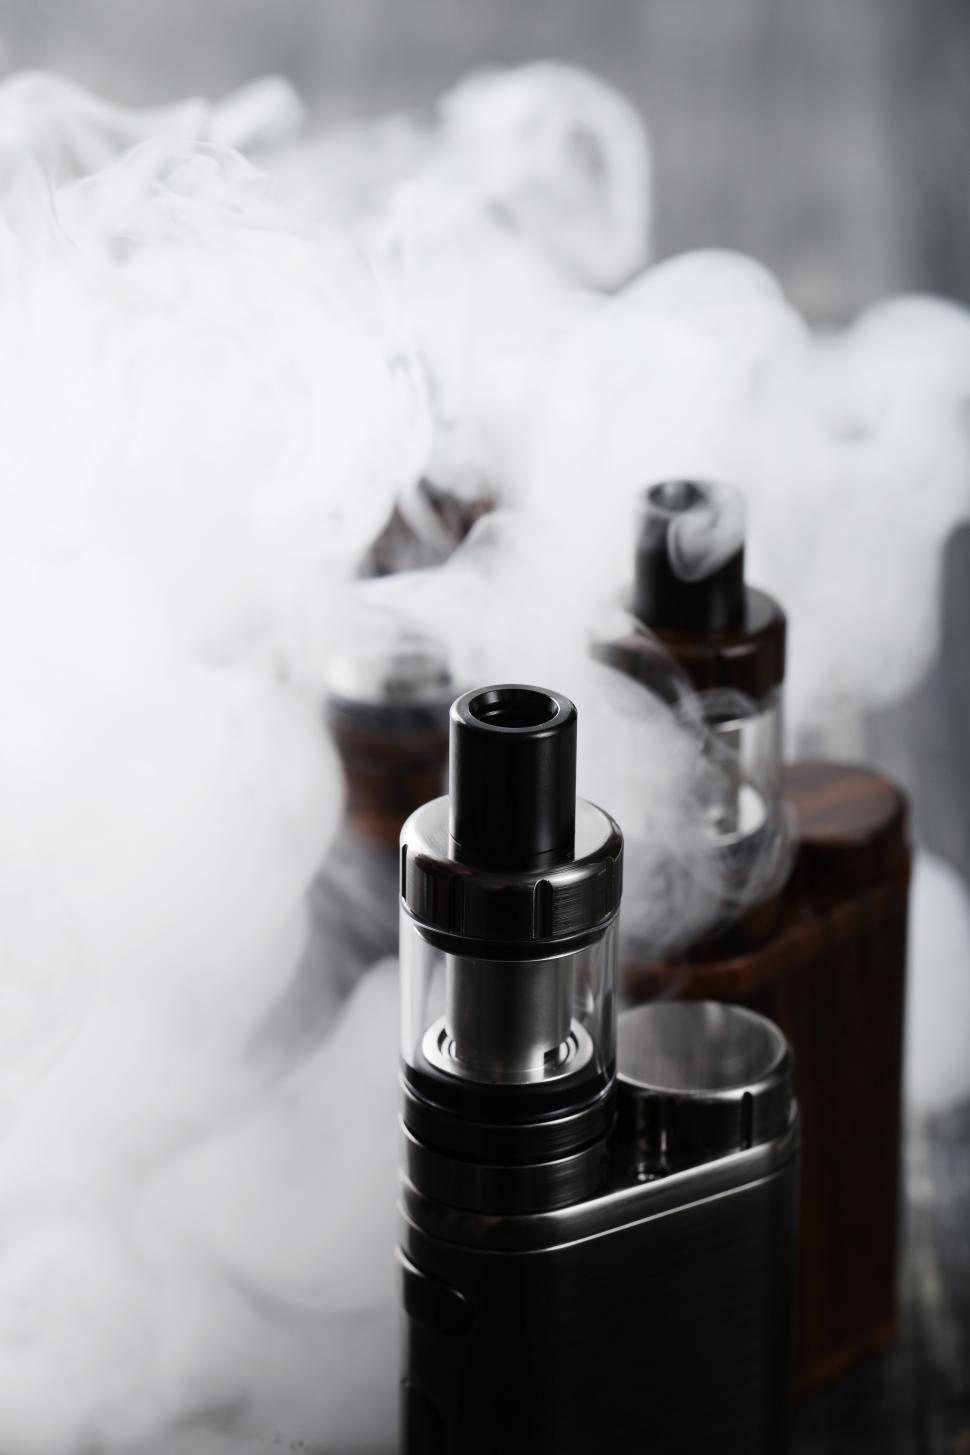 Download Free Stock Photo of Vaping device 